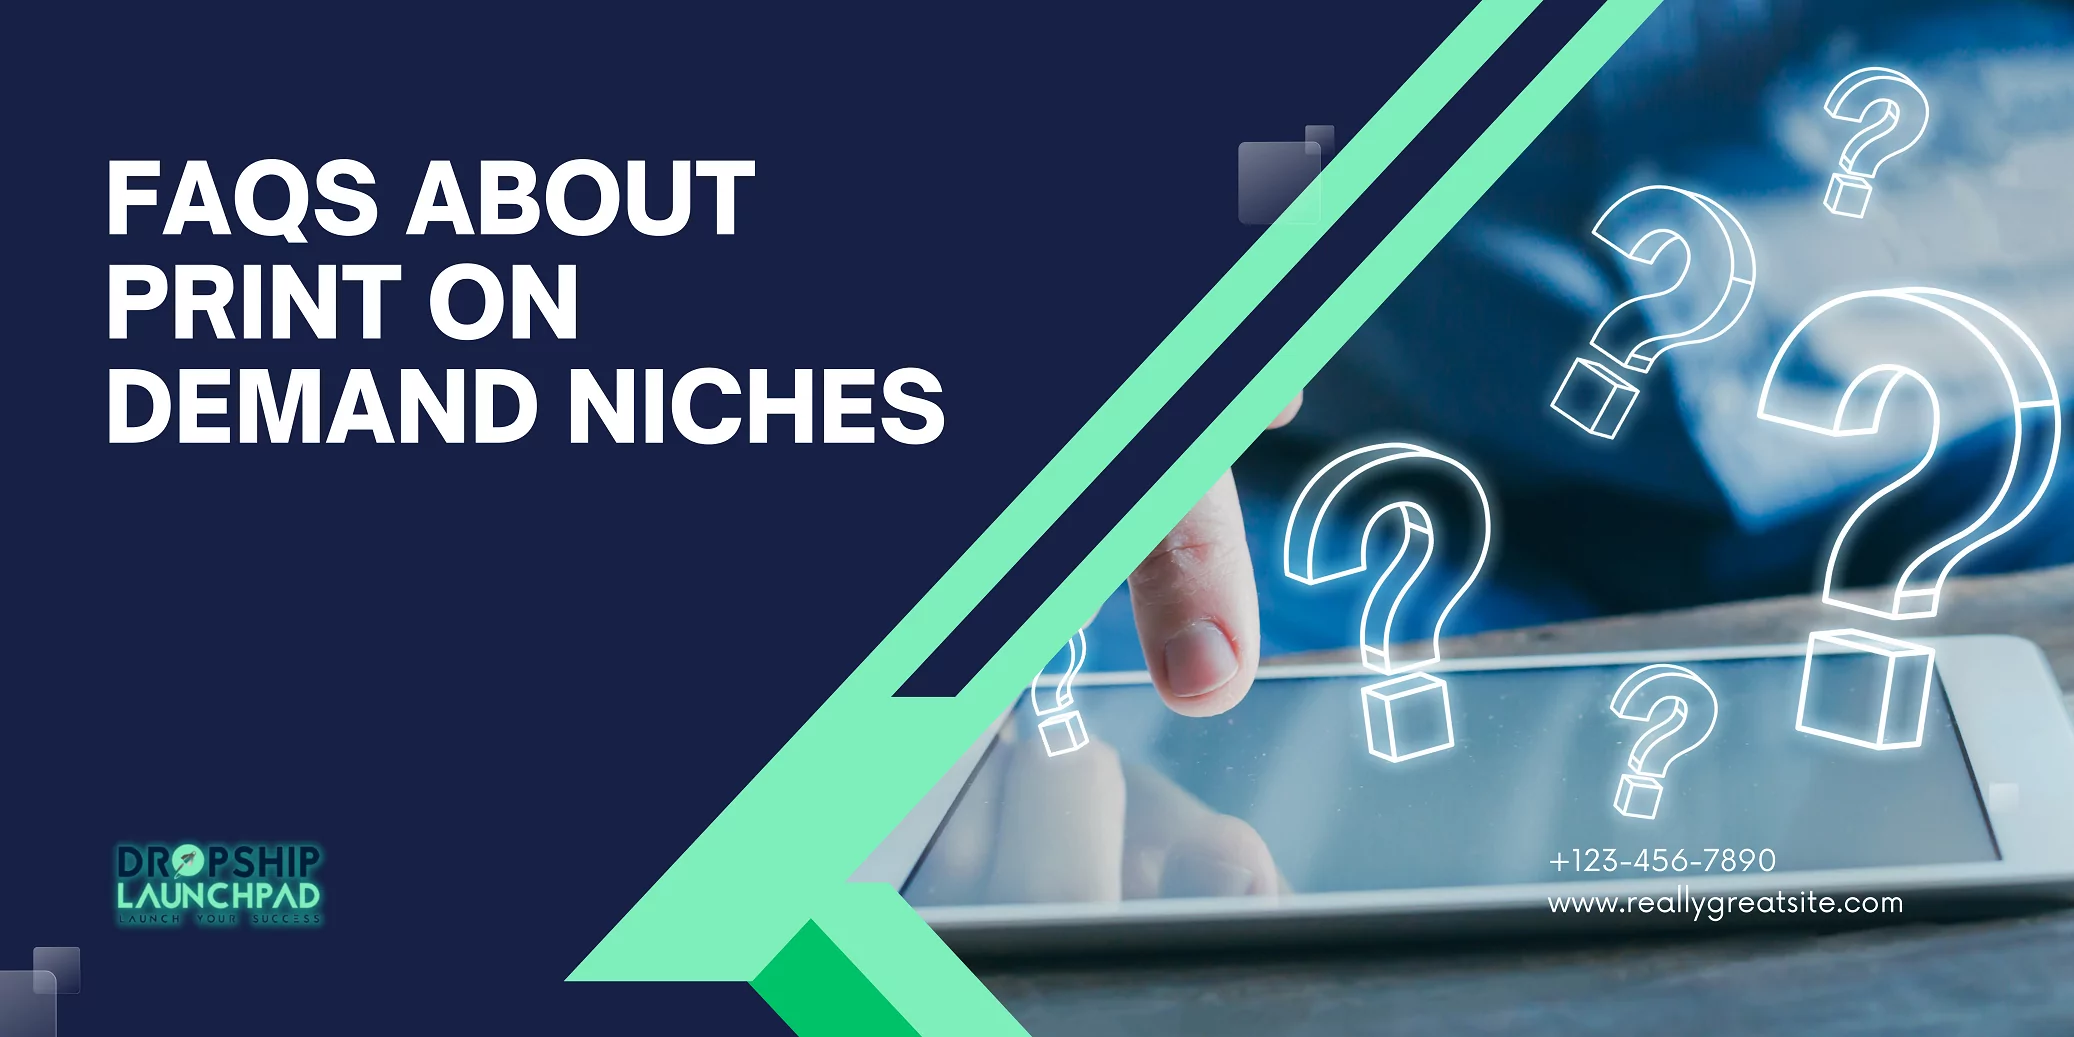 FAQs About Print on Demand Niches